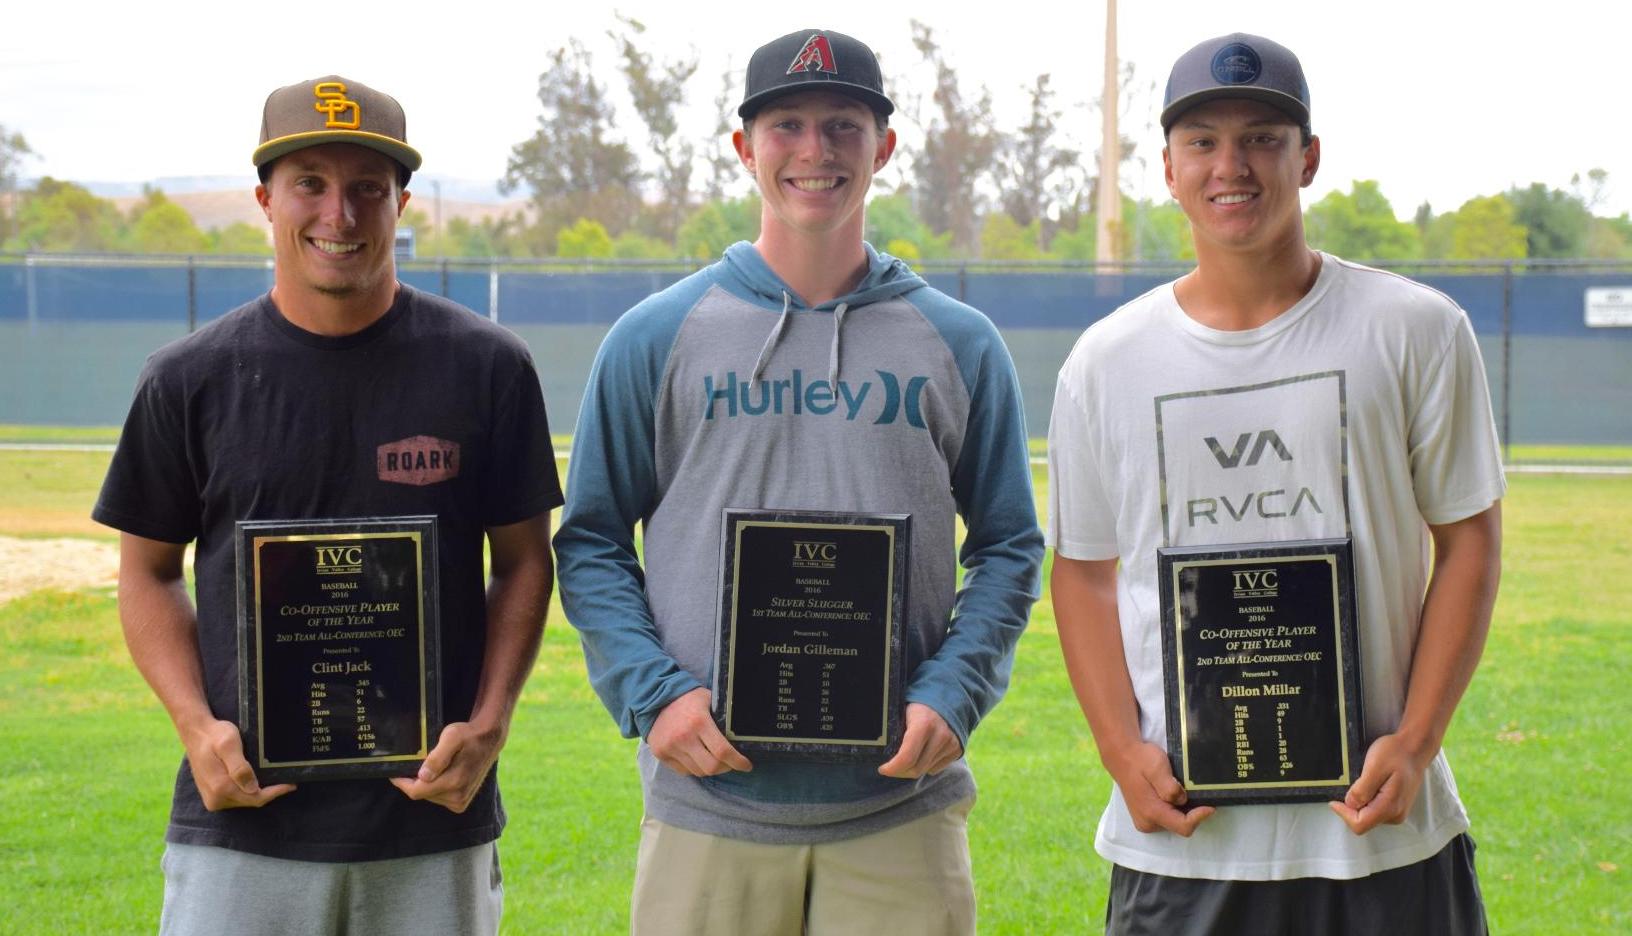 Three baseball players honored with team awards